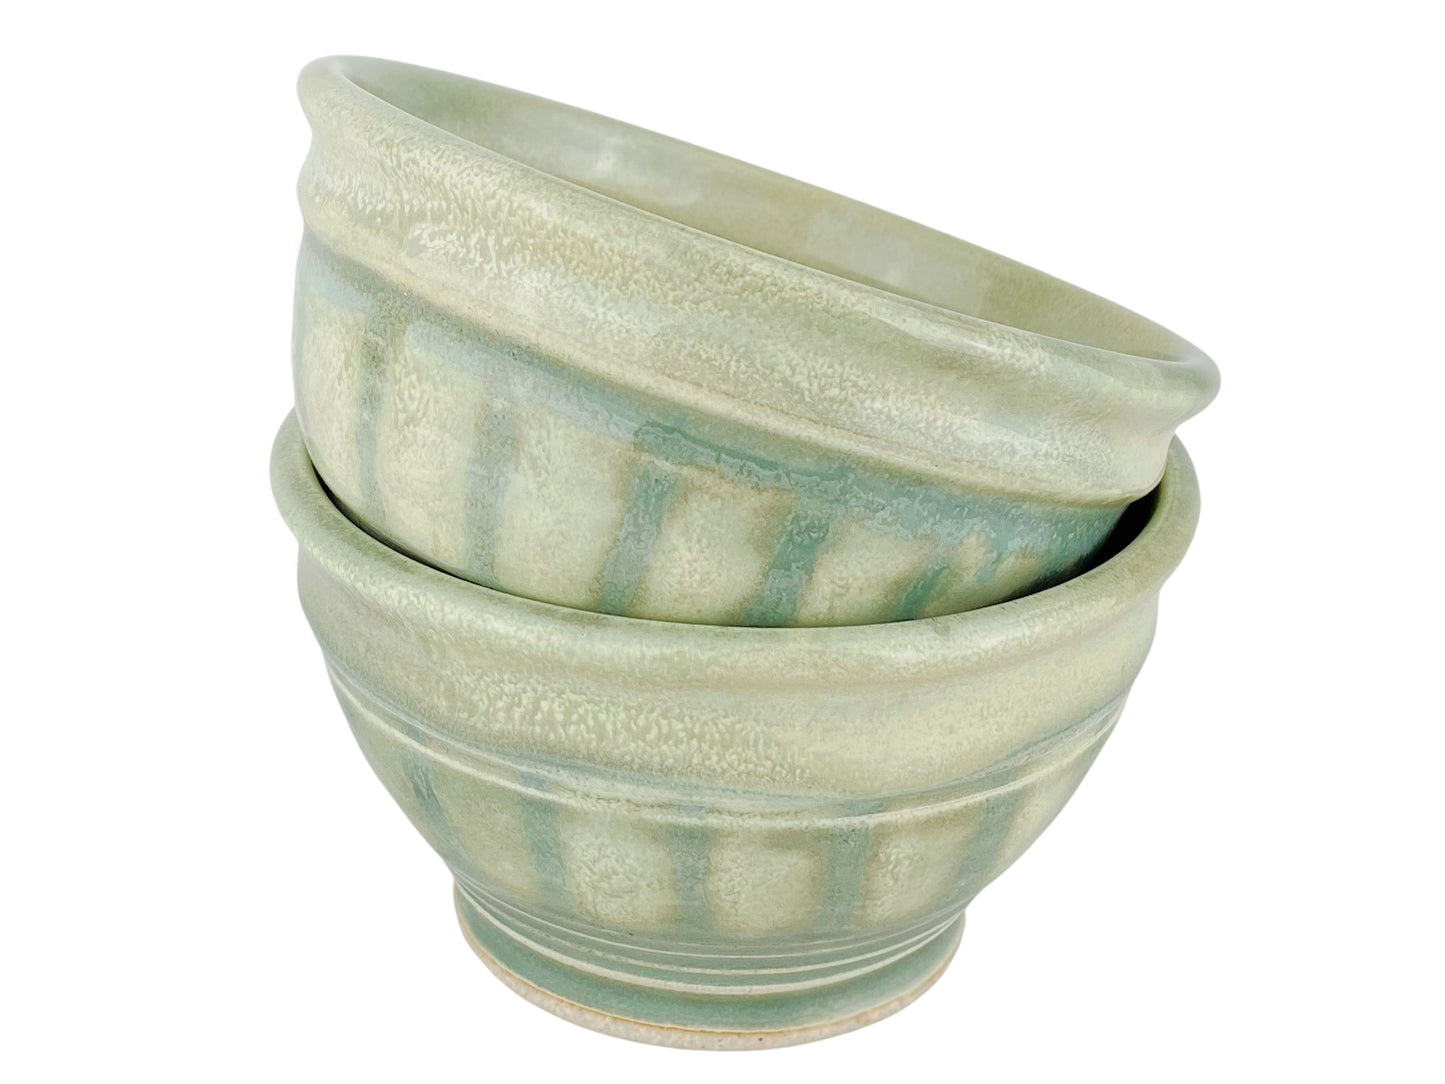 Cereal or Soup Bowls, Pale Yellow Green with Grey Green Accents